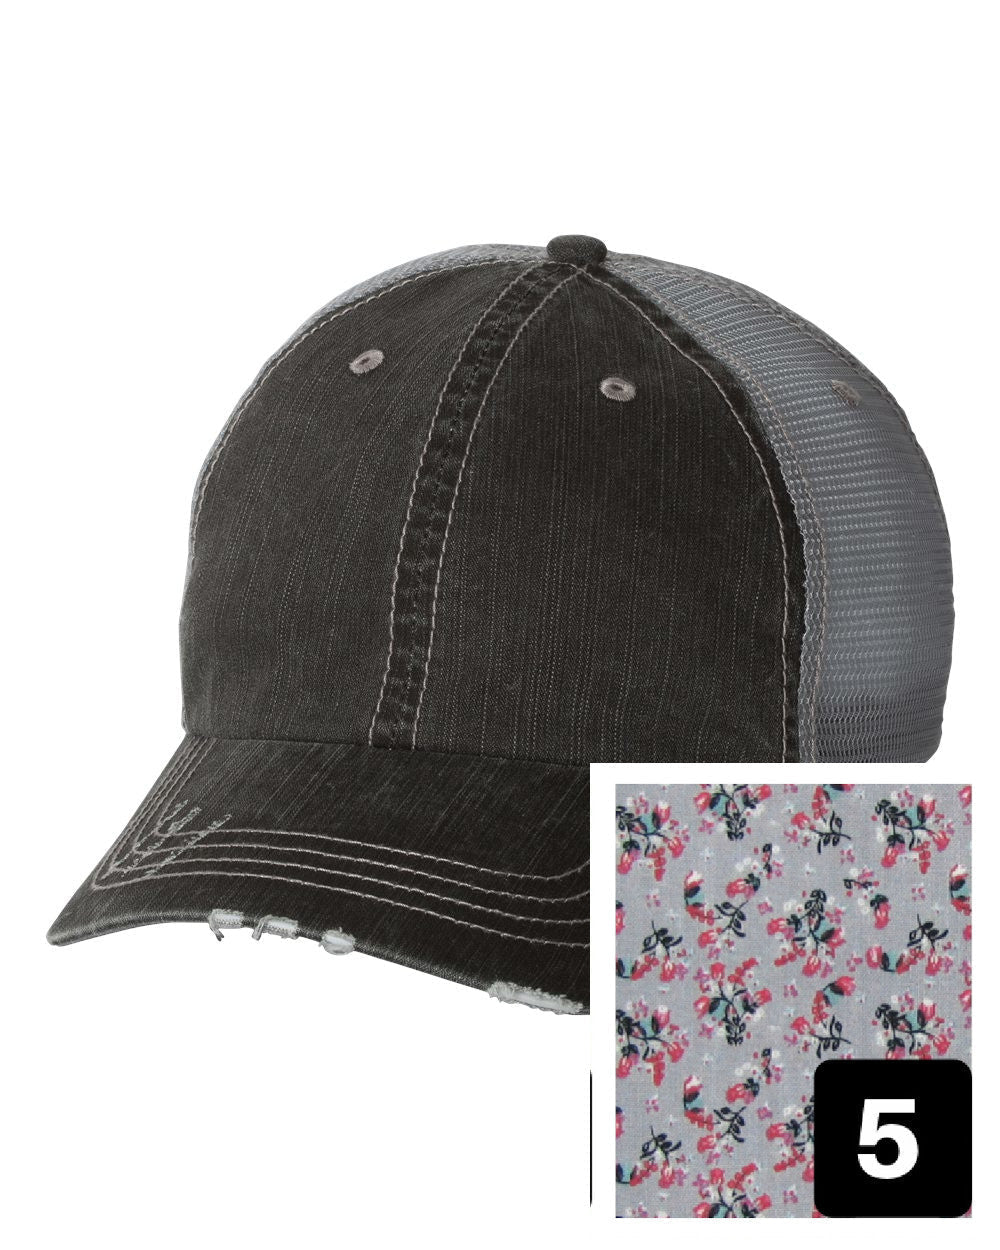 gray distressed trucker hat with purple and pink floral fabric state of Delaware